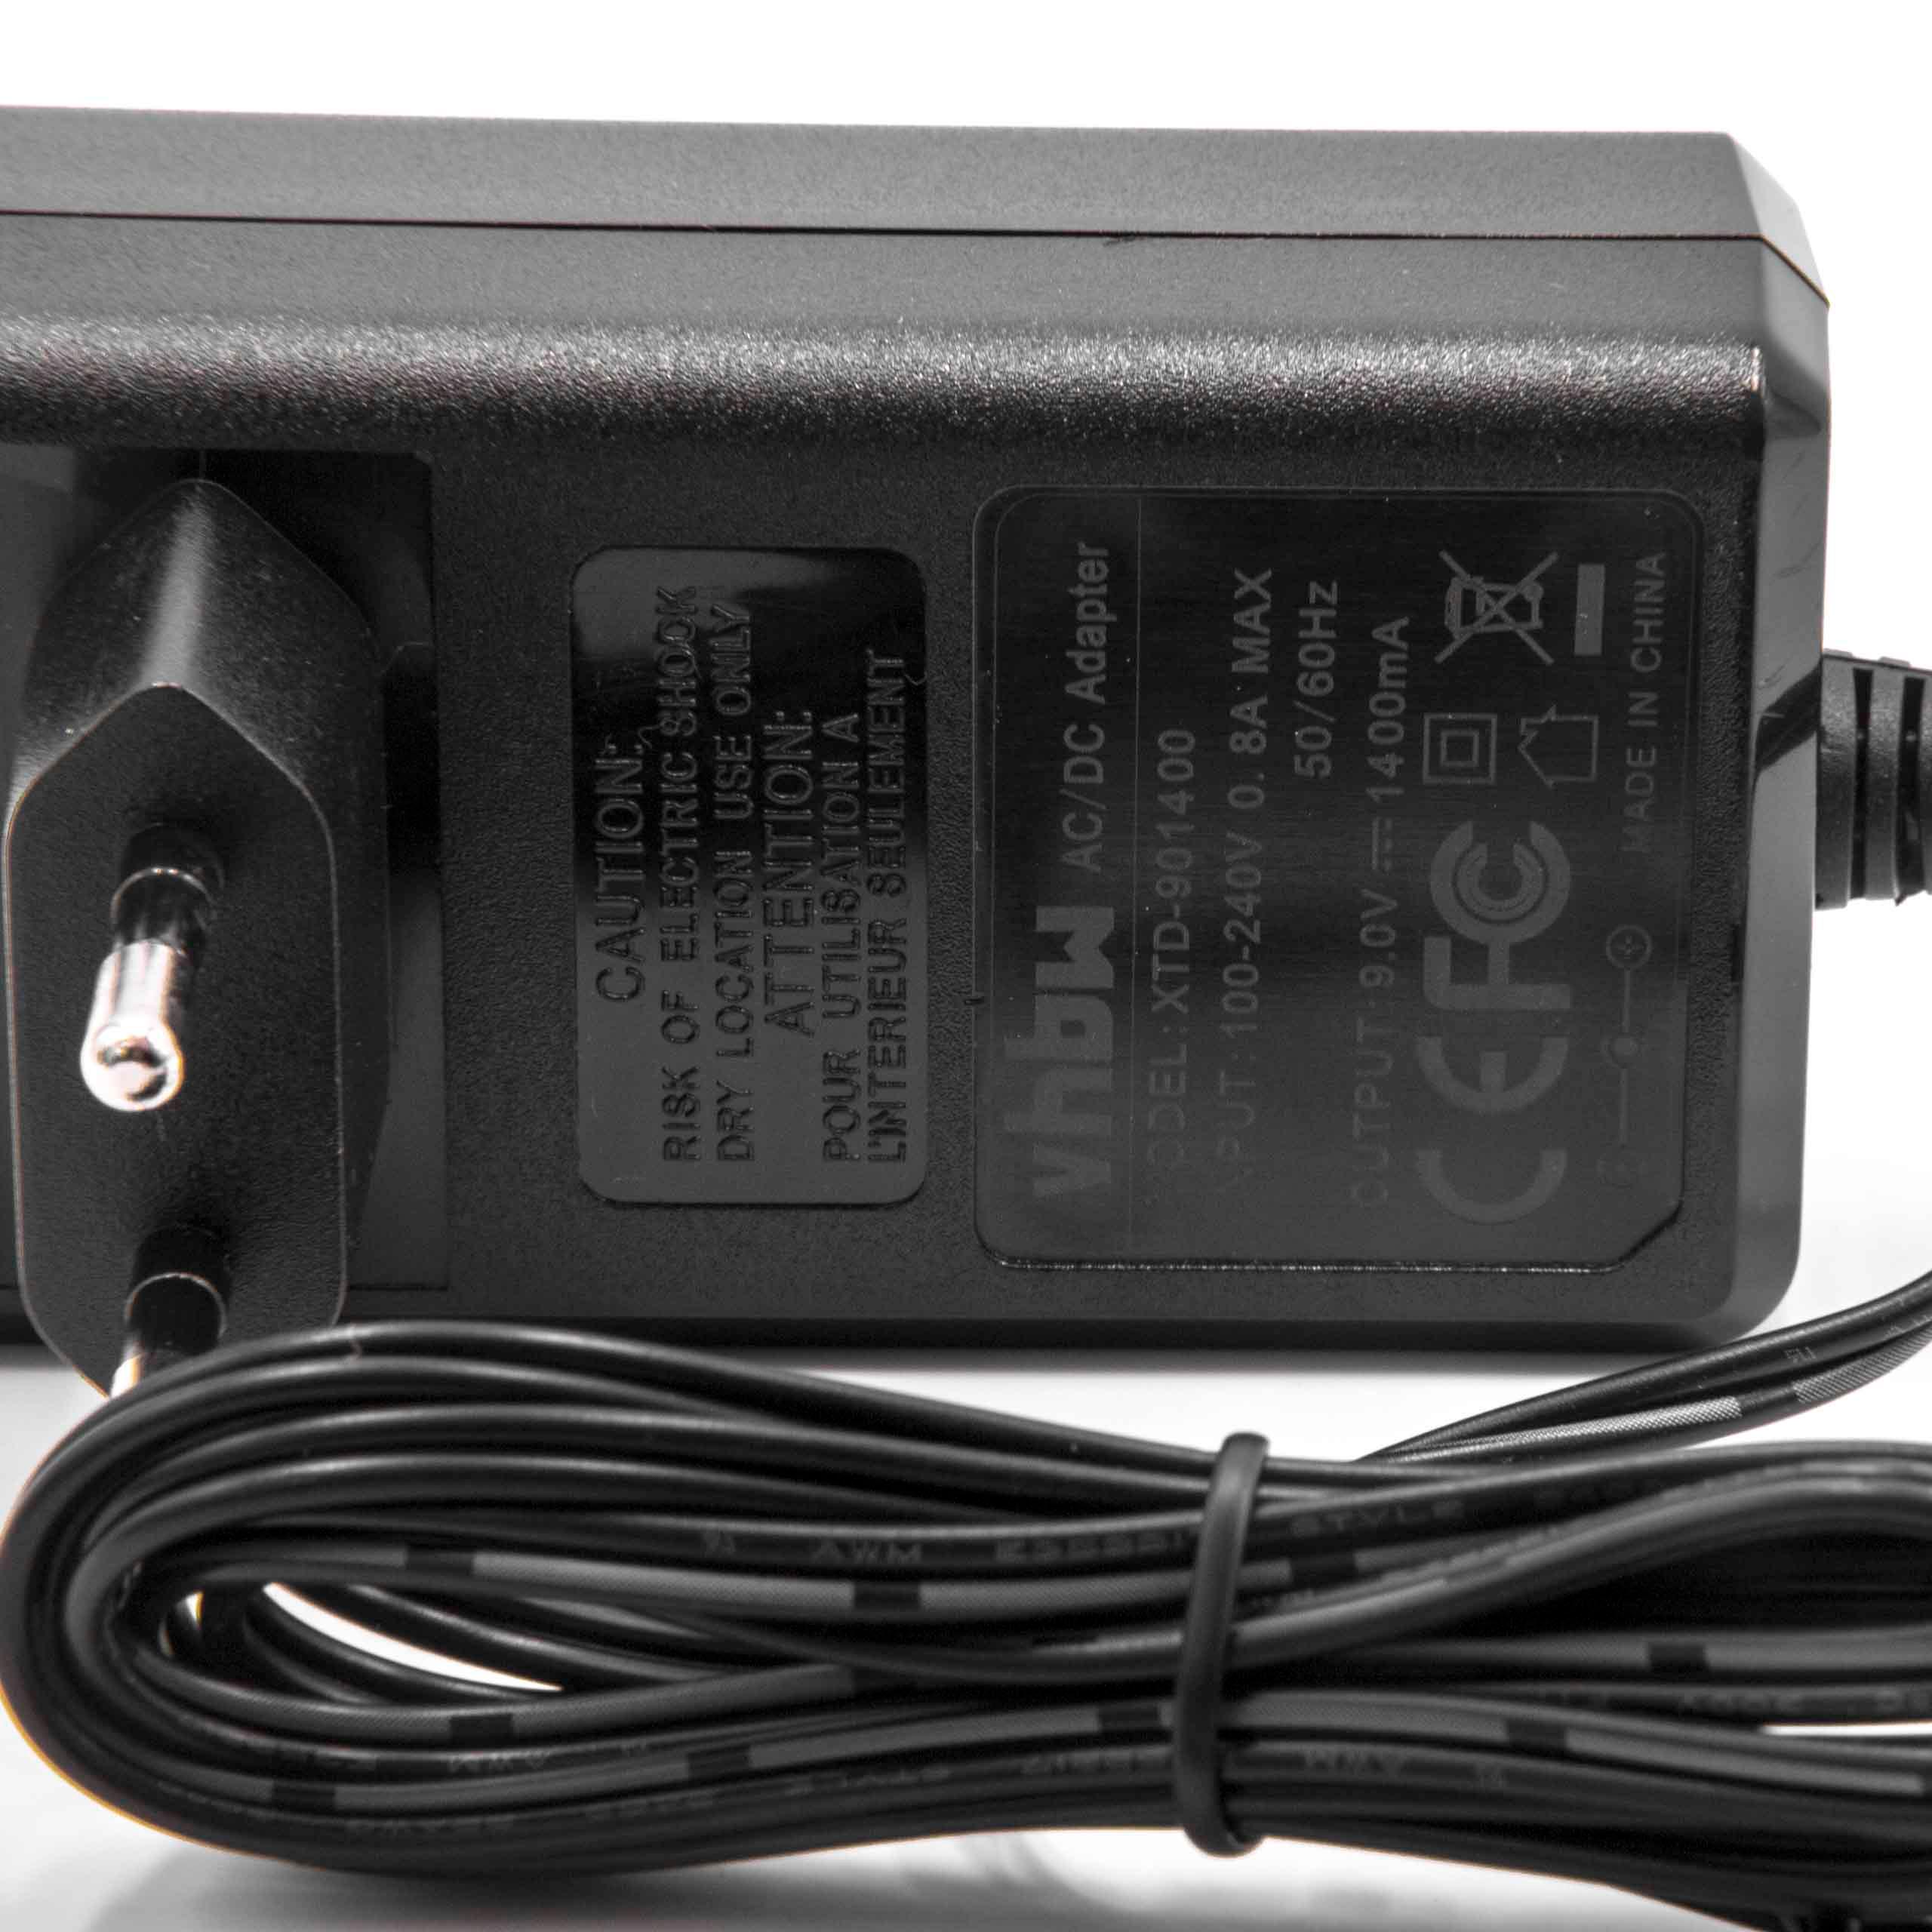 Mains Power Adapter replaces Compex 683010 for Compex Muscle Stimulator, Electro-Stimulator - 200 cm